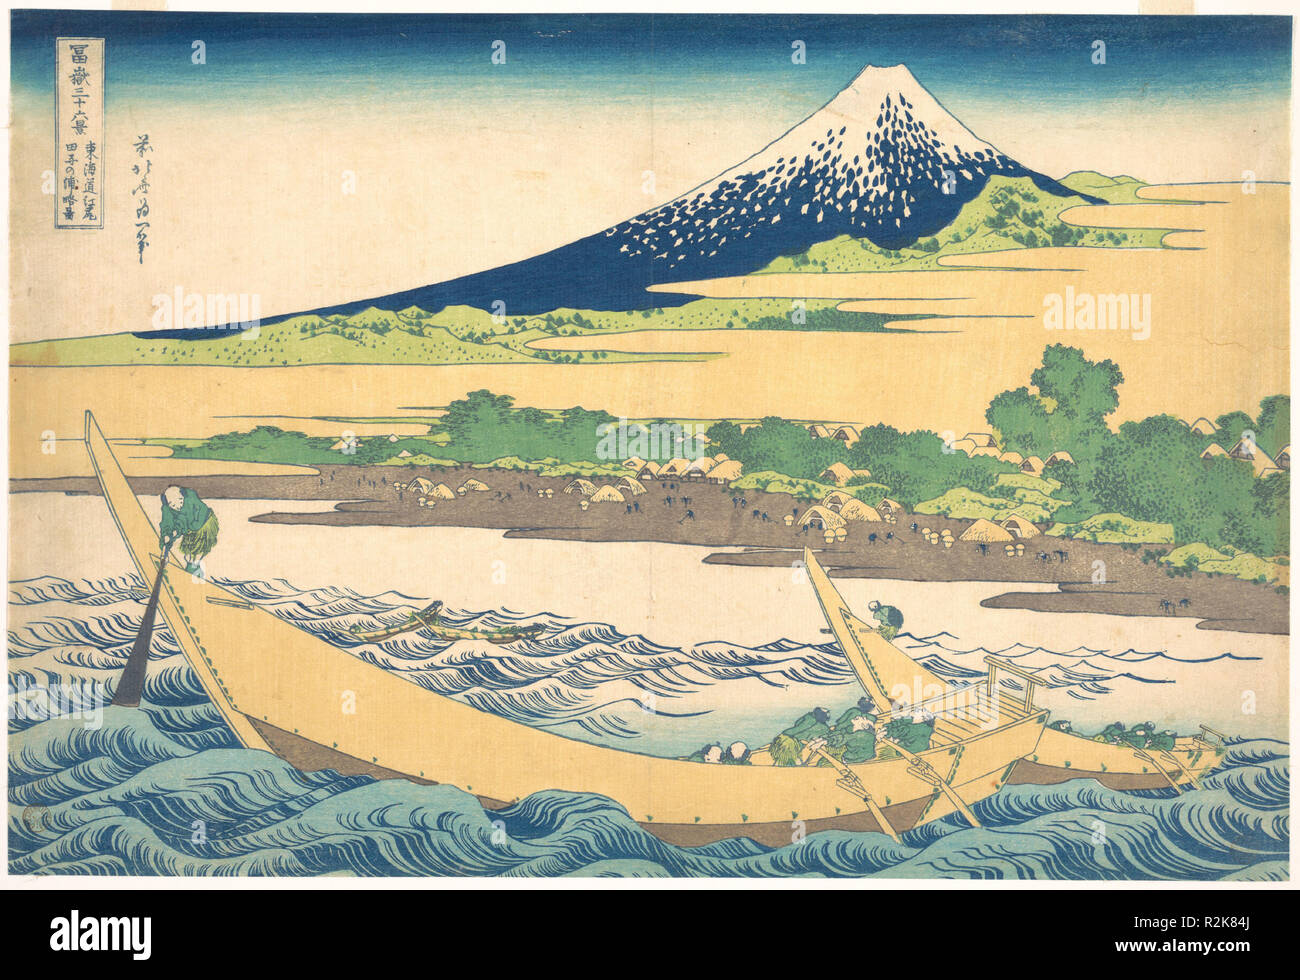 Tago Bay near Ejiri on the Tokaido (Tokaido Ejiri Tago no ura ryaku zu), from the series Thirty-six Views of Mount Fuji (Fugaku sanjurokkei). Artist: Katsushika Hokusai (Japanese, Tokyo (Edo) 1760-1849 Tokyo (Edo)). Culture: Japan. Dimensions: 9 3/4 x 14 3/8 in. (24.8 x 36.5 cm). Date: ca. 1830-32.  Men struggle to steer their junks through the strong currents of Tago Bay while a fisherman casts his net into the turbulent sea. The curved shape of the mountain, echoing that of the junks, serves as a counterpoise to the foreground scene. Museum: Metropolitan Museum of Art, New York, USA. Stock Photo